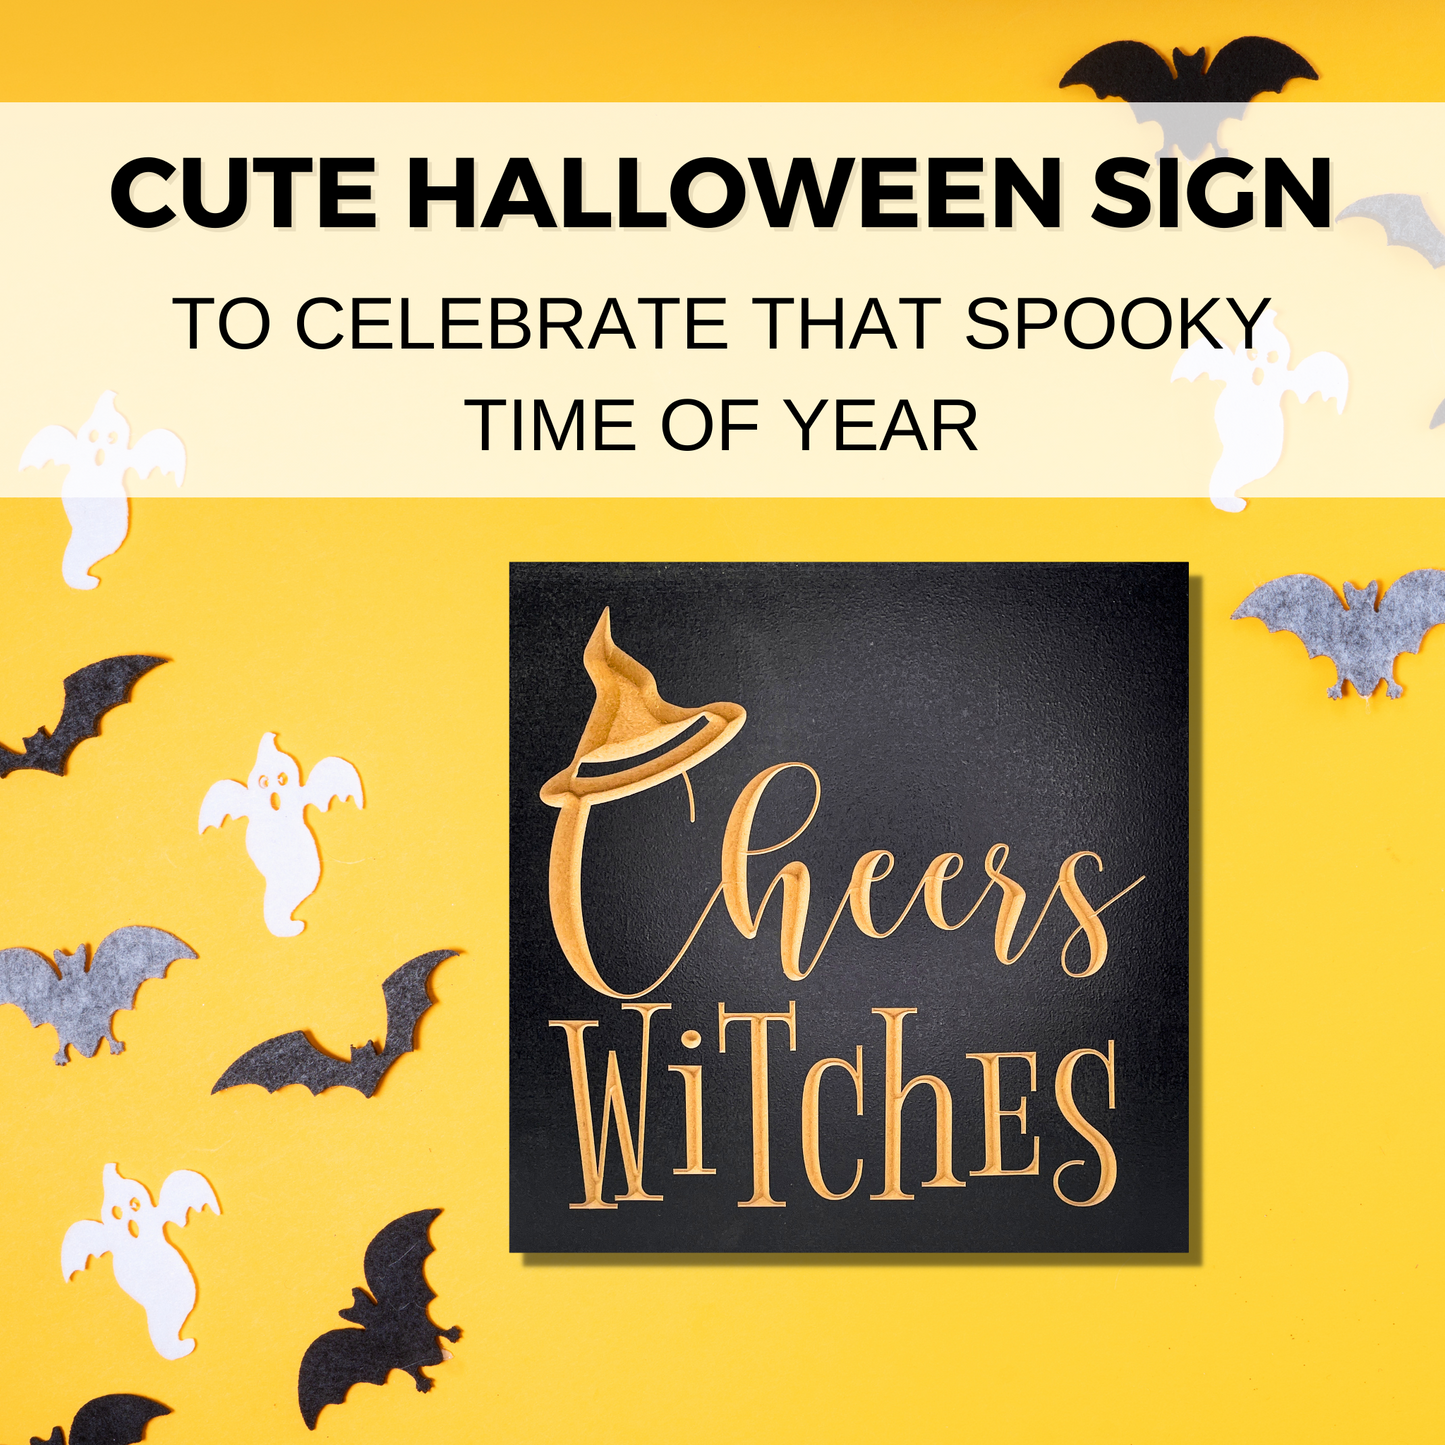 Cheers Witches Carved Wooden Halloween Sign Spooky